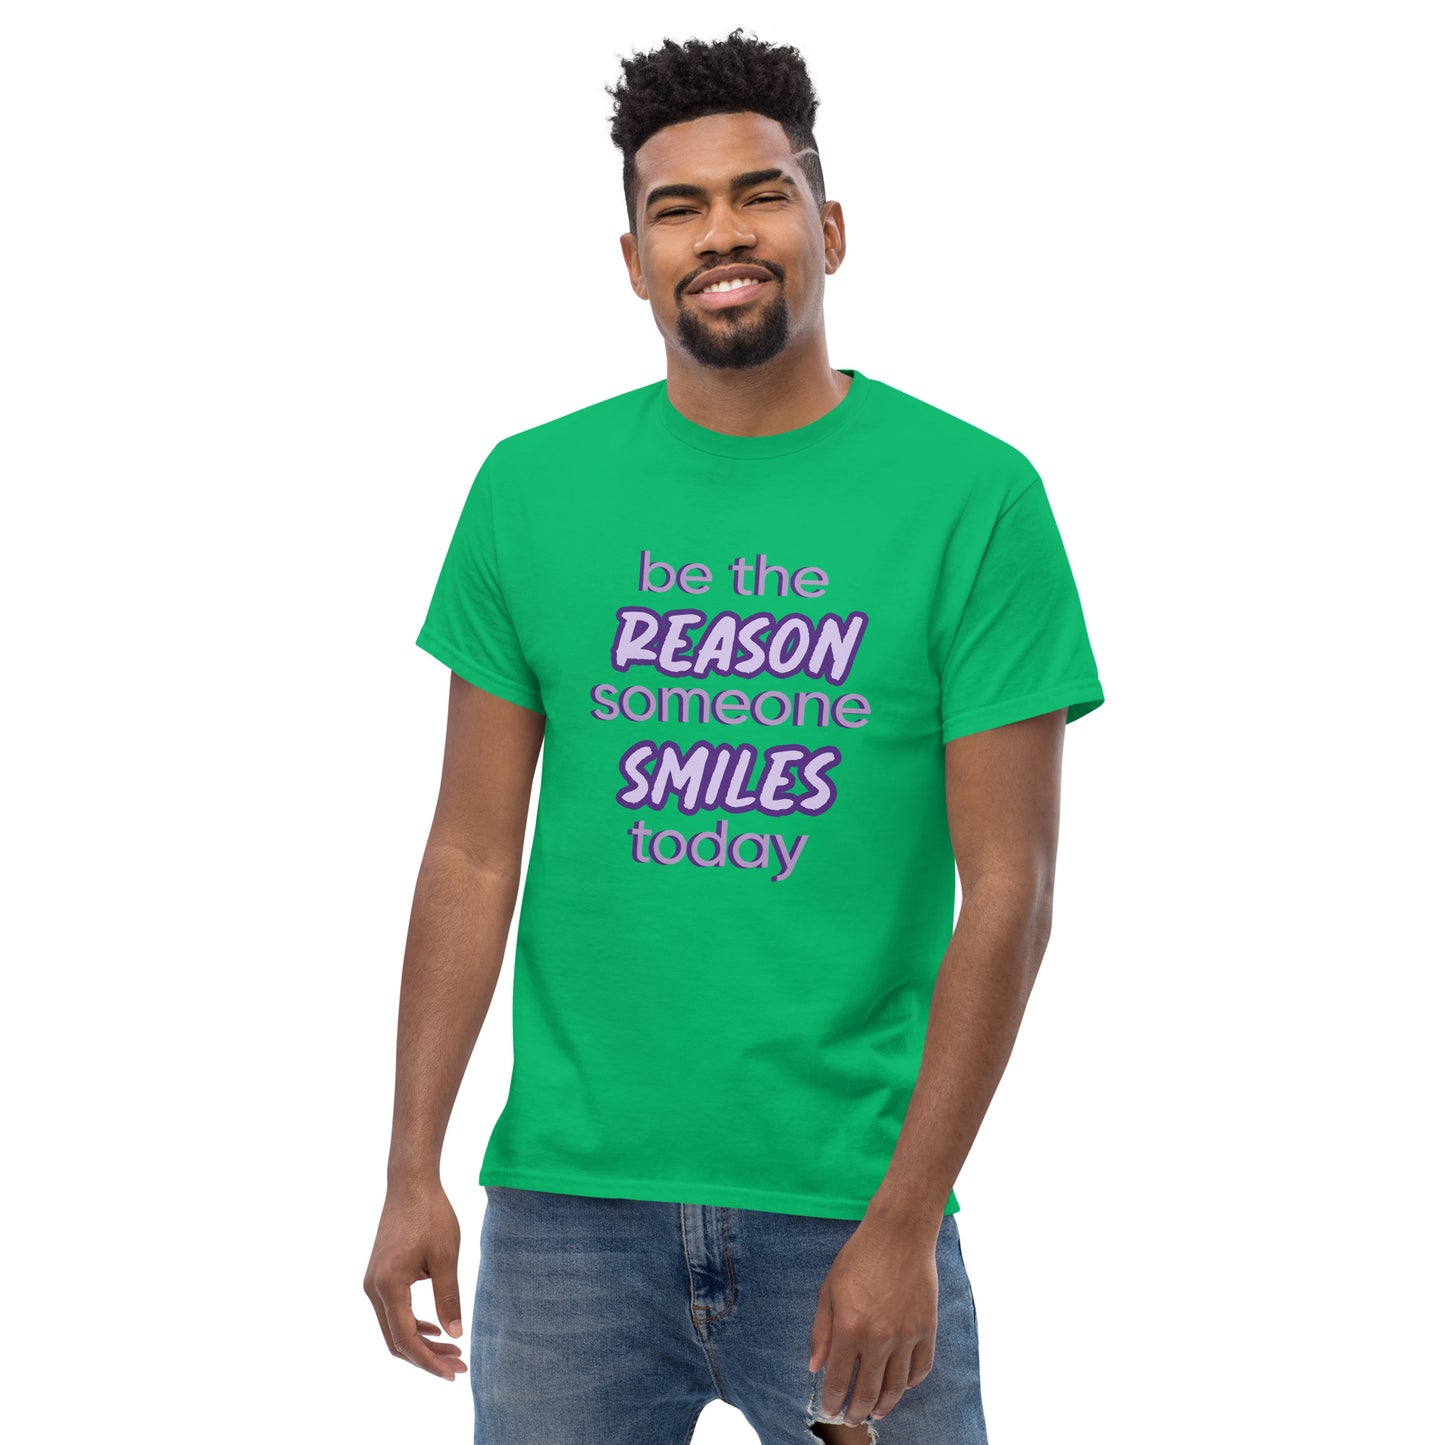 Men with irish green T-shirt and the quote "be the reason someone smiles today" in purple on it. 